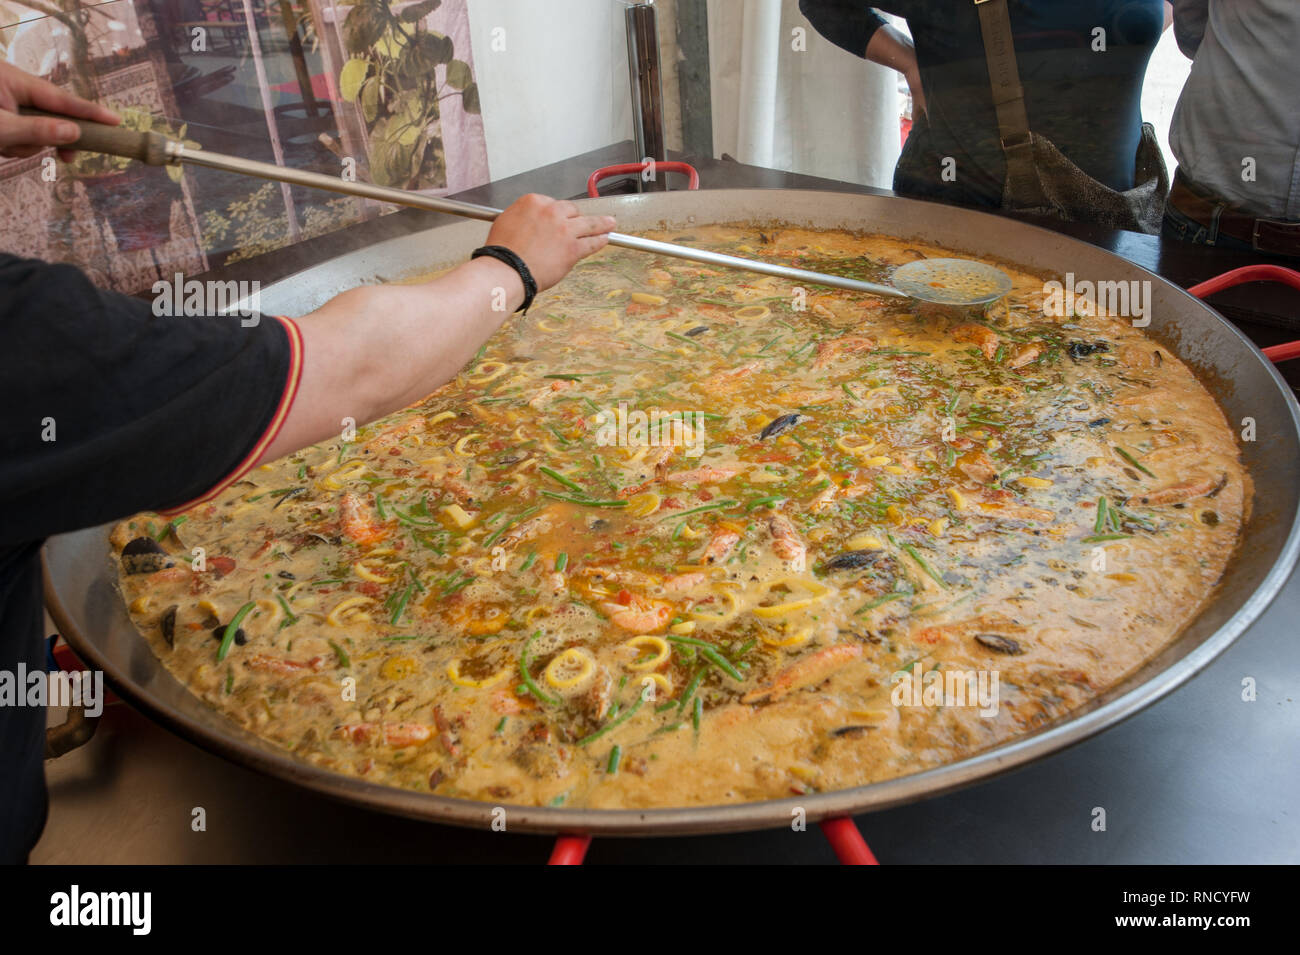 https://c8.alamy.com/comp/RNCYFW/the-cook-prepares-paella-with-seafood-mussels-shrimps-and-green-bean-in-a-extra-large-frying-pan-RNCYFW.jpg